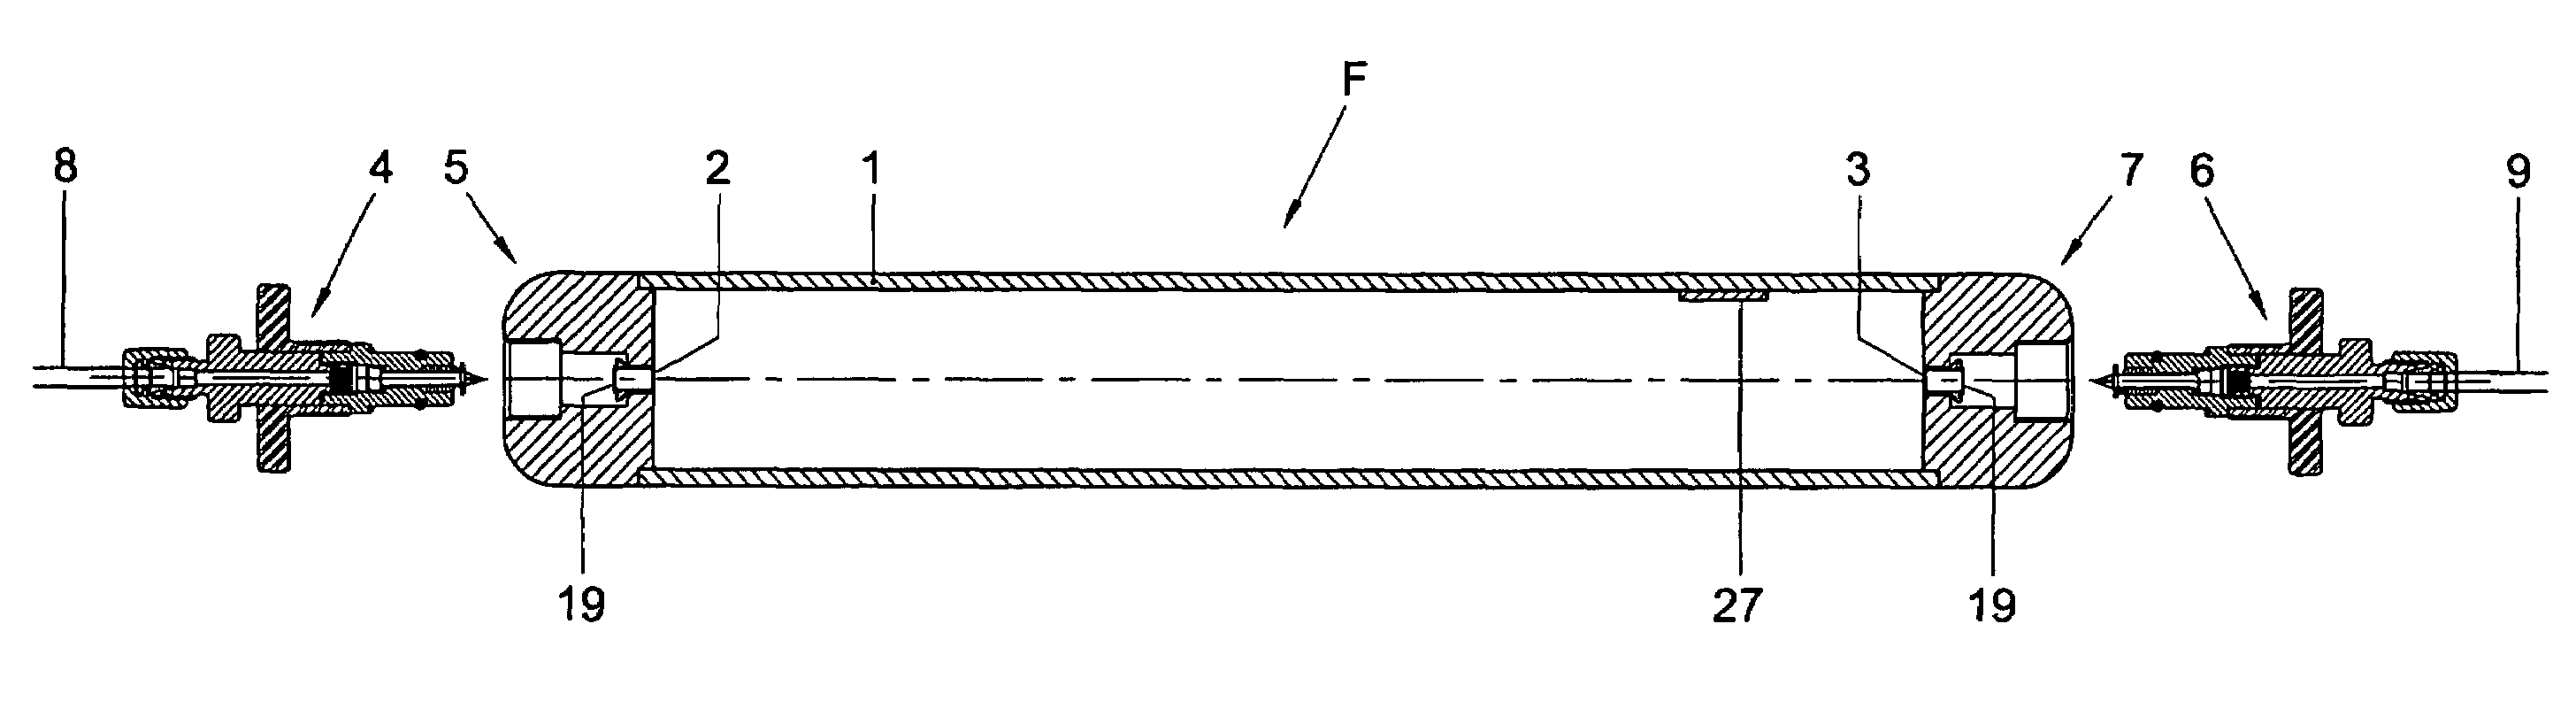 In-line filter with quick-change coupling and a filter